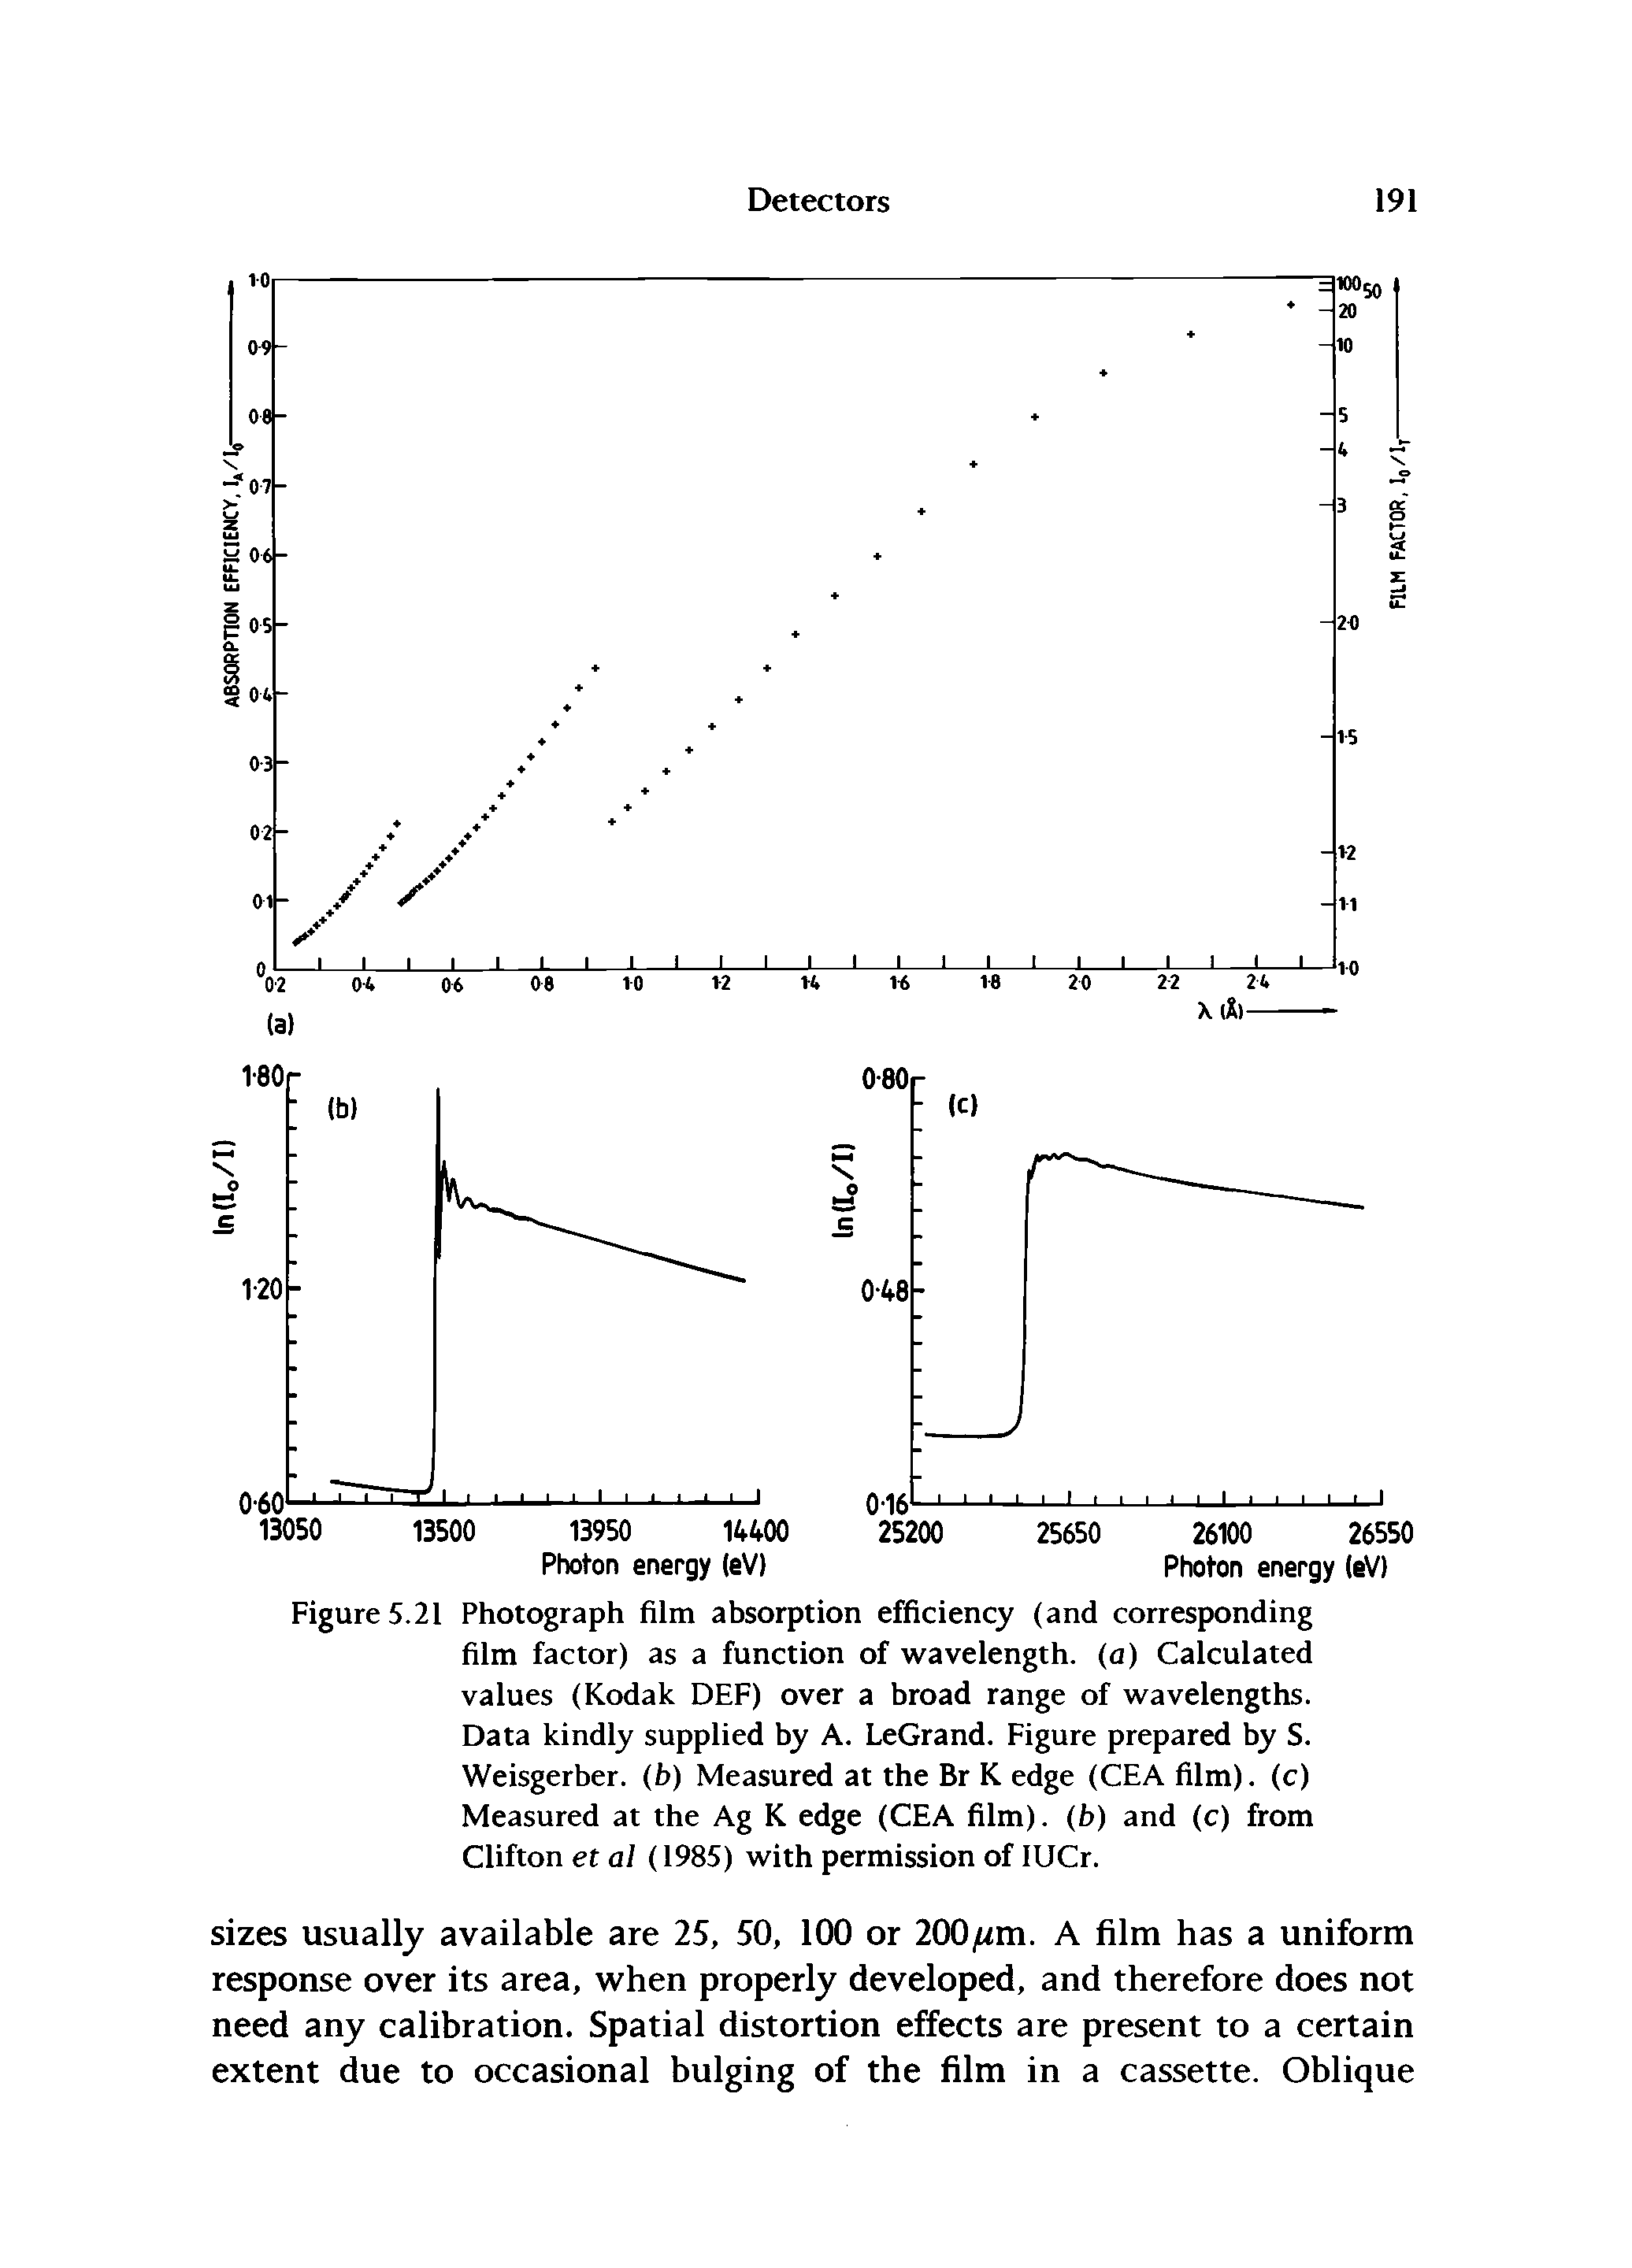 Figure 5.21 Photograph film absorption efficiency (and corresponding film factor) as a function of wavelength, (a) Calculated values (Kodak DEF) over a broad range of wavelengths.